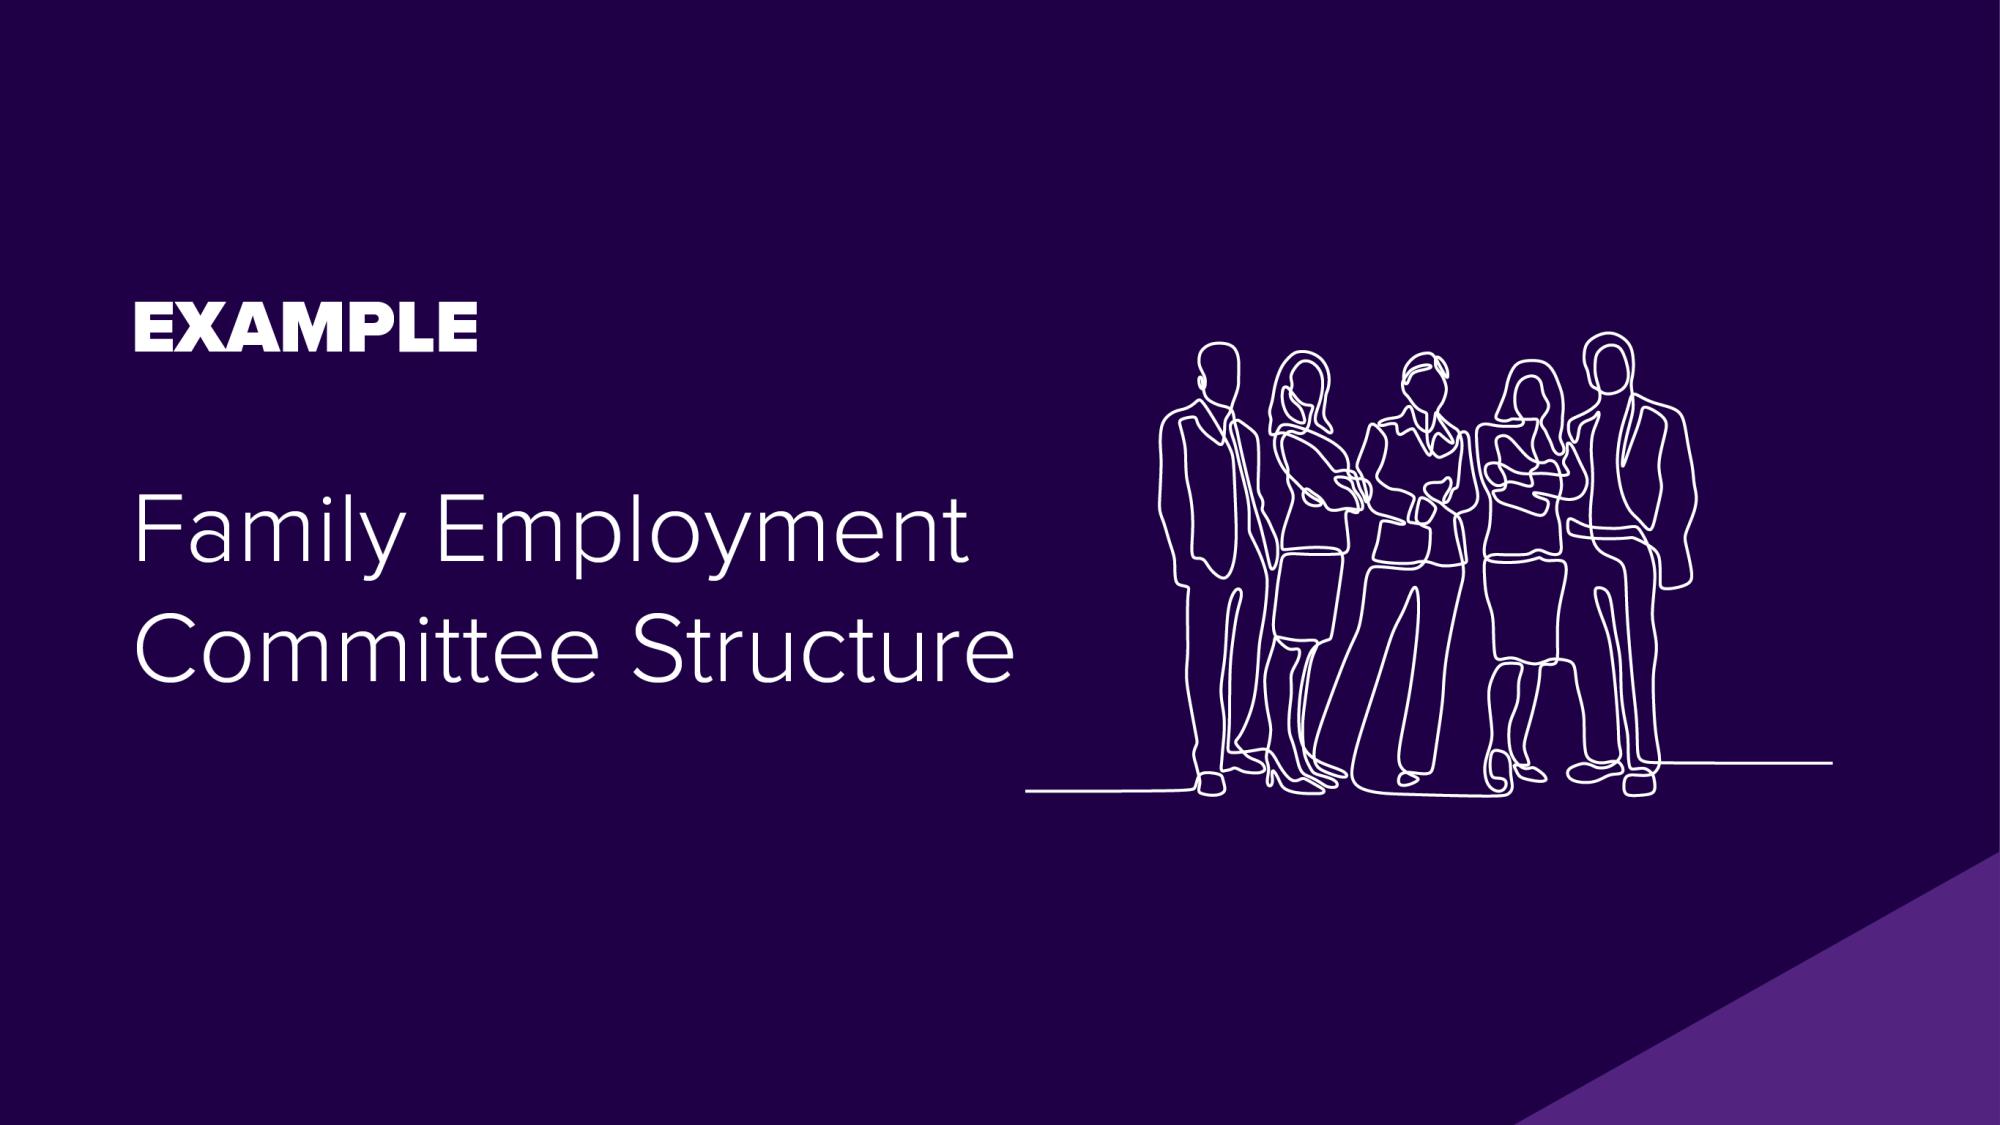 Family Employment Committee Structure